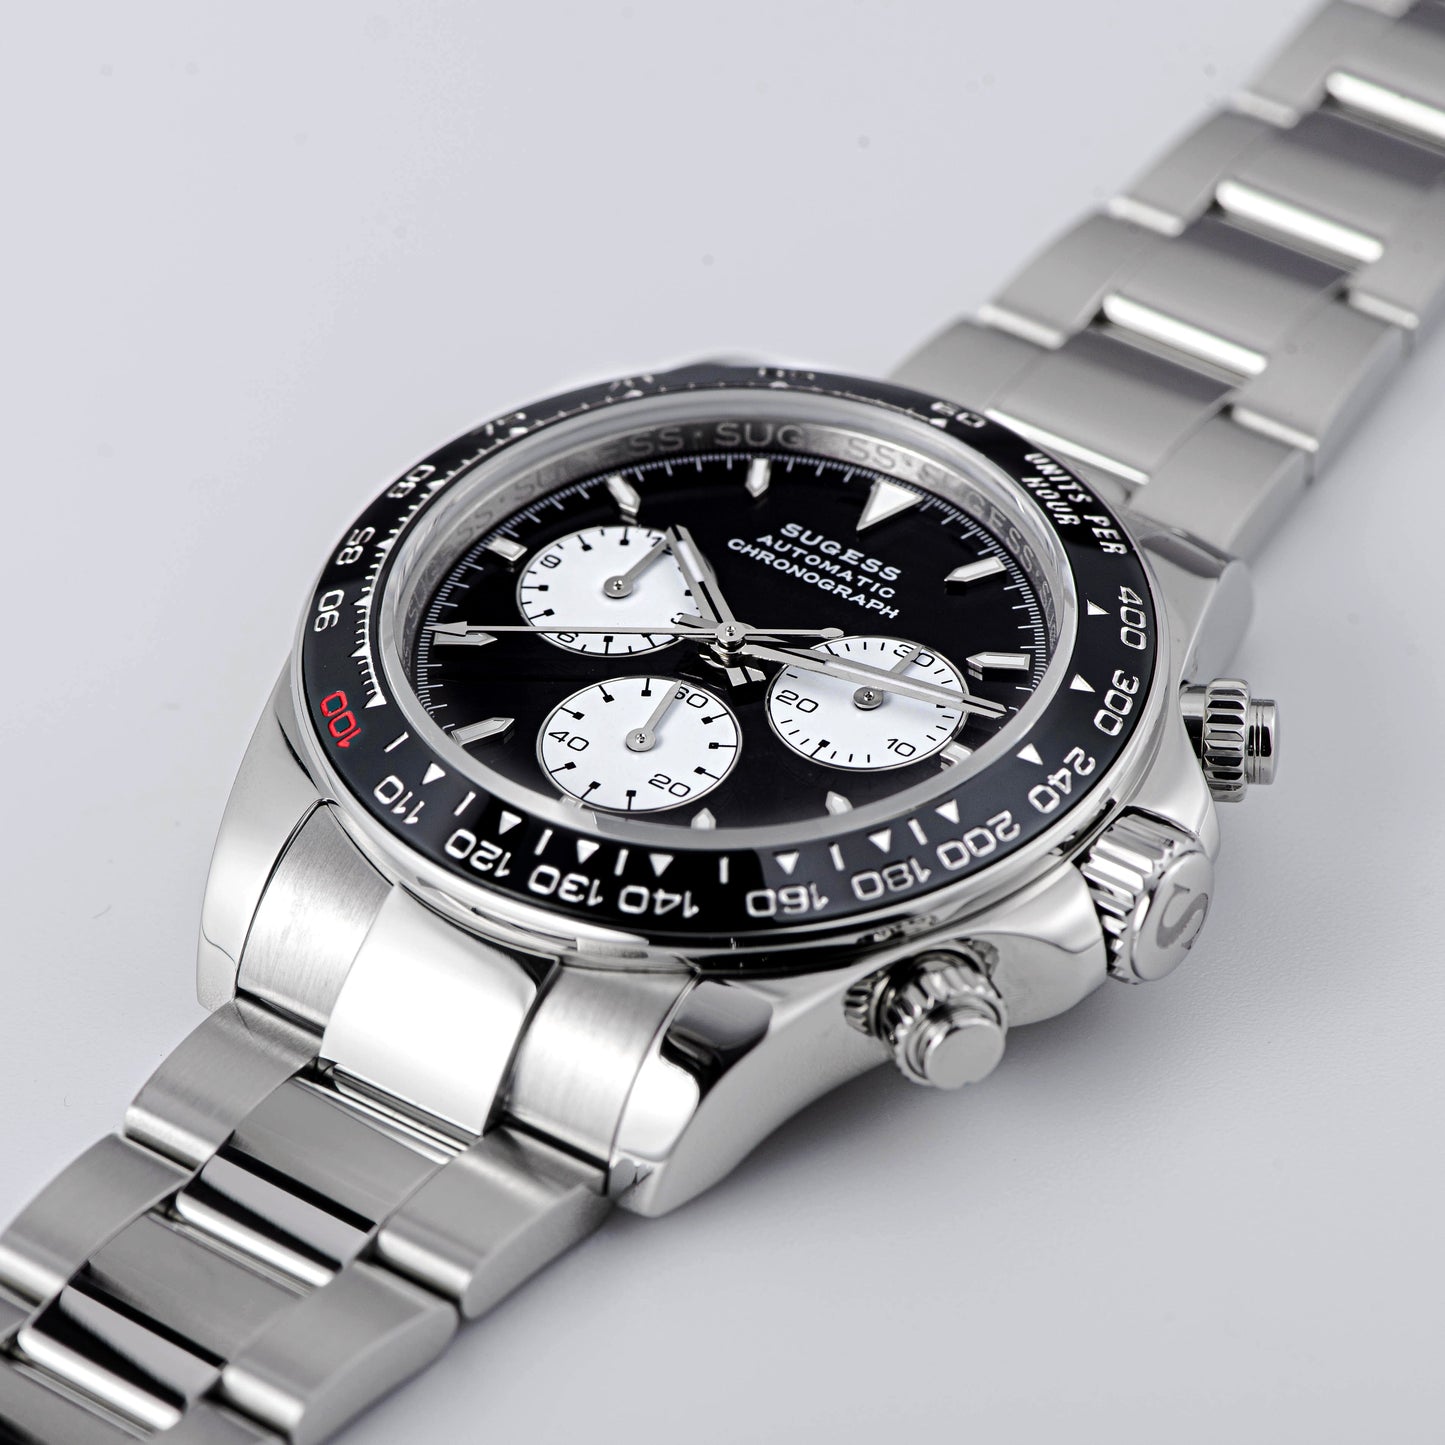 Automatic Chronograph 418-2 Black Dial Stainless Steel Bezel Professional